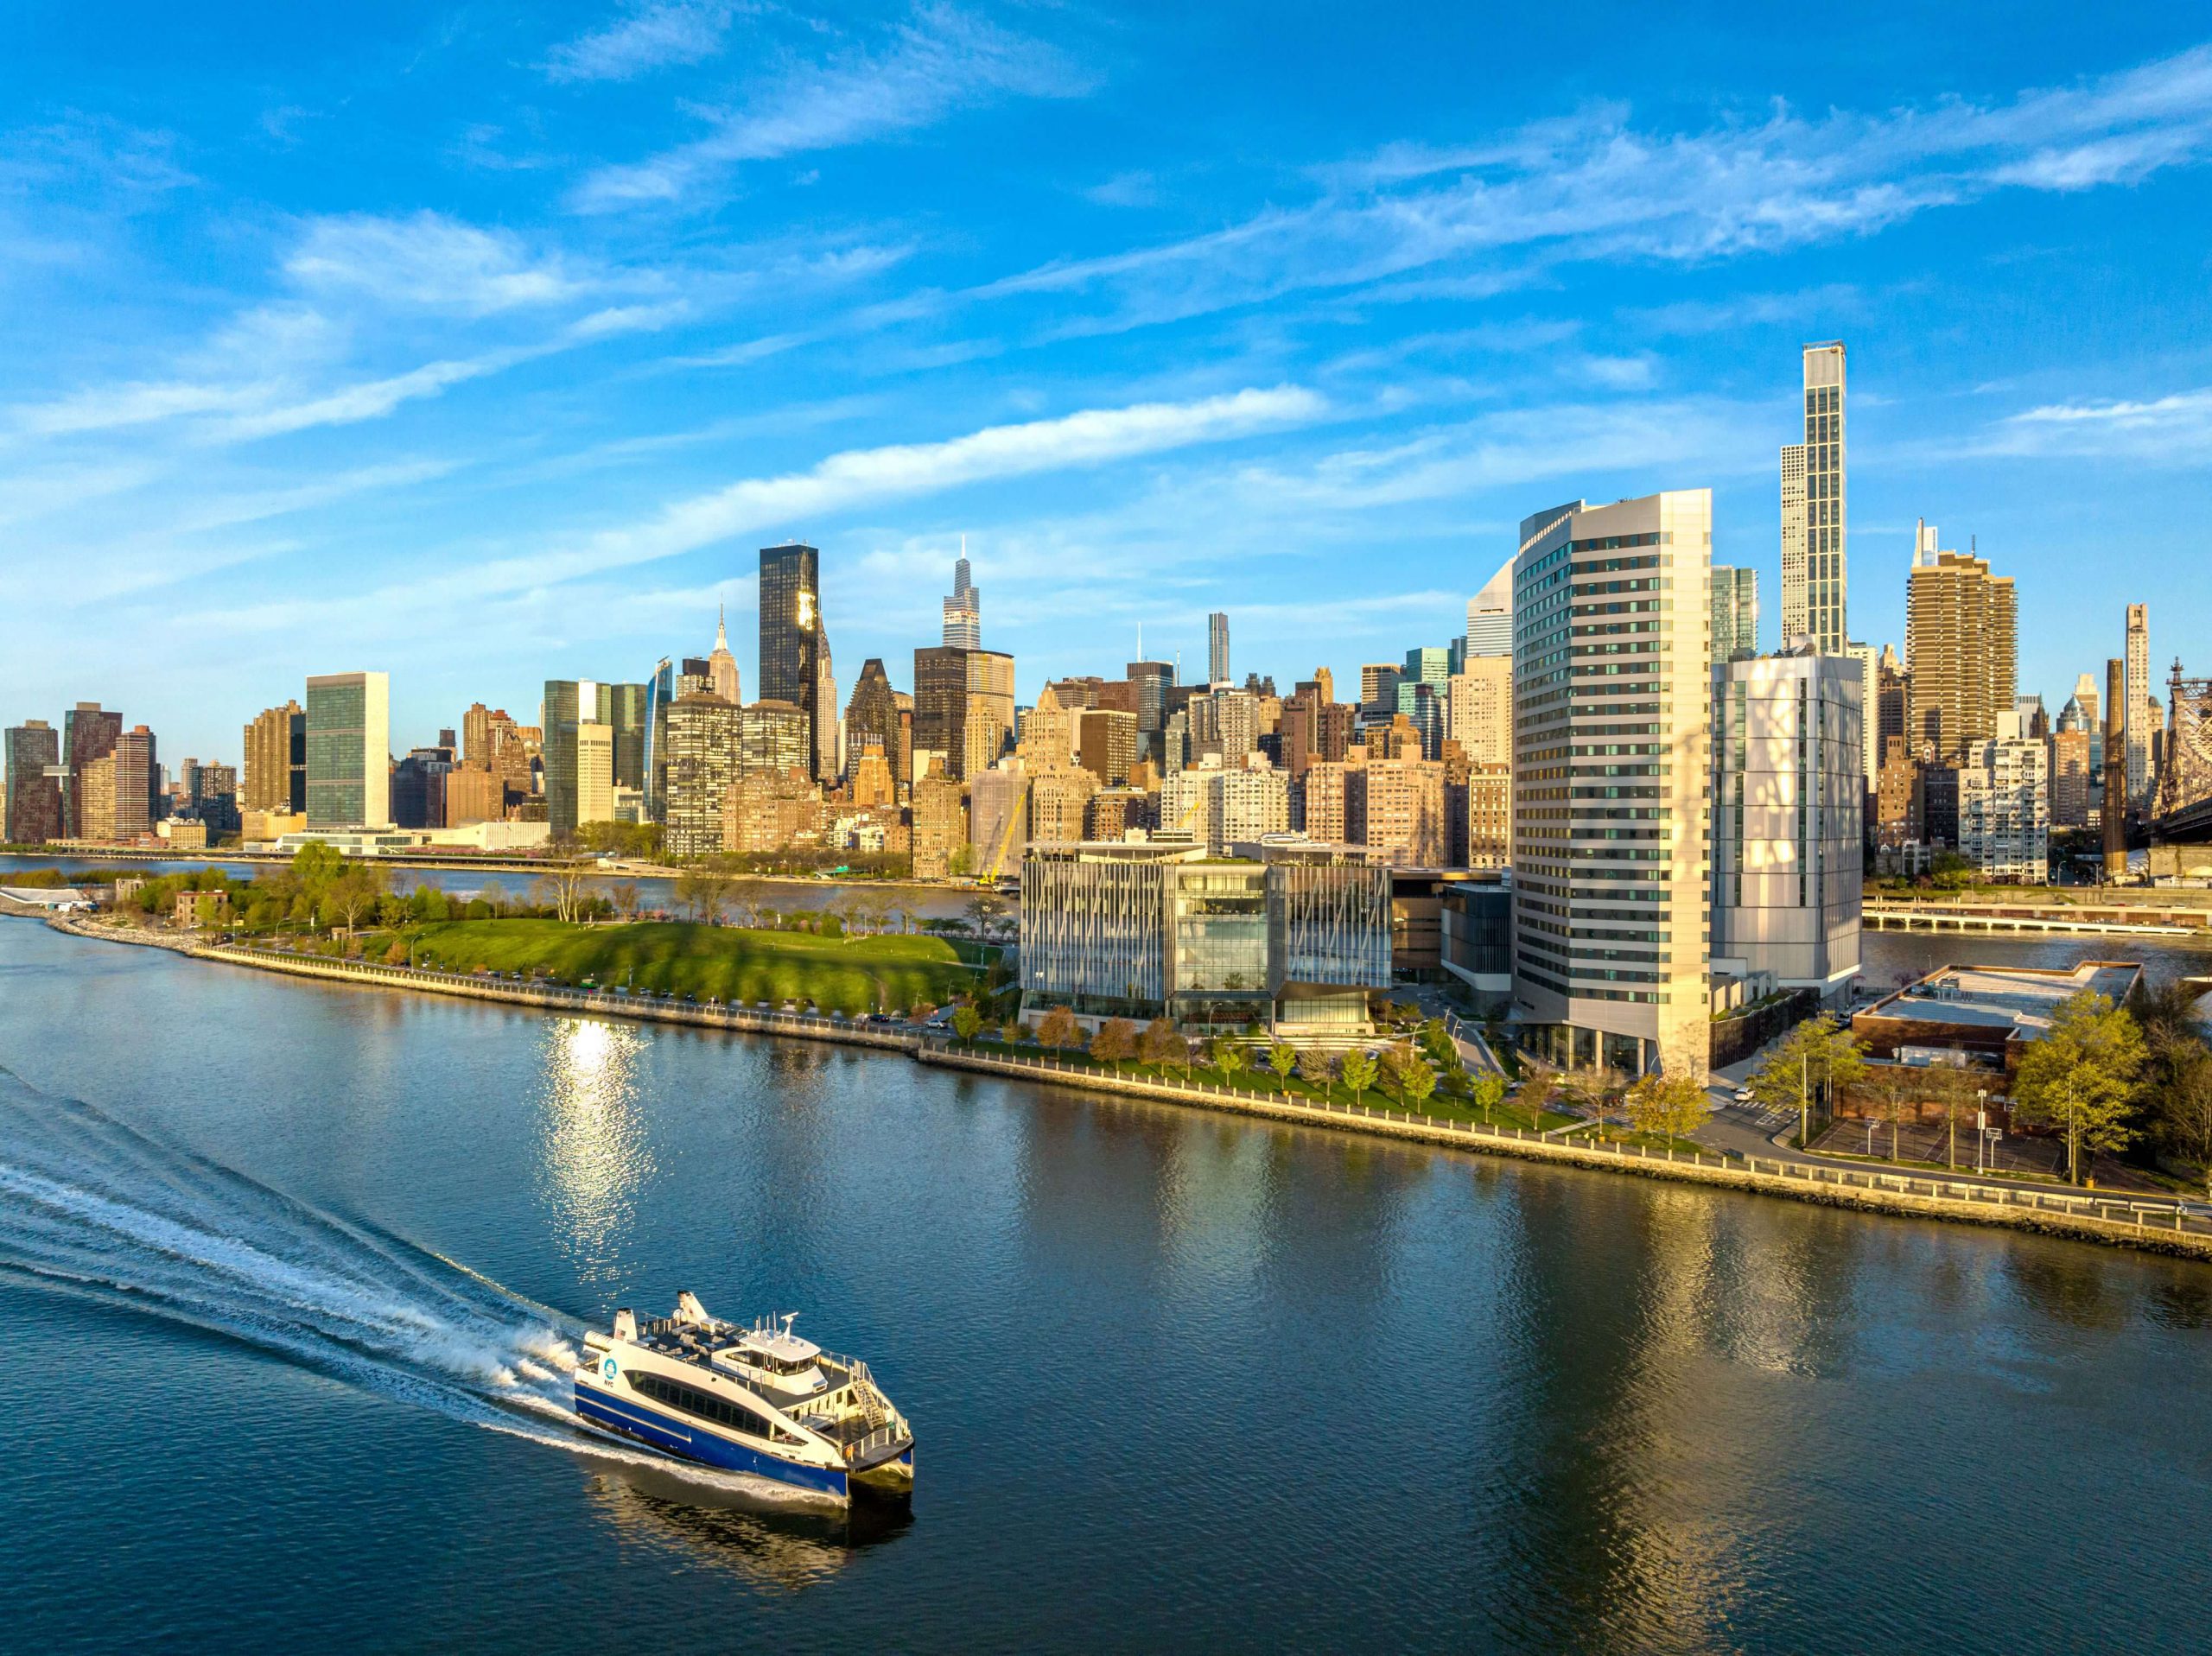 Cornell Tech Campus and the East River